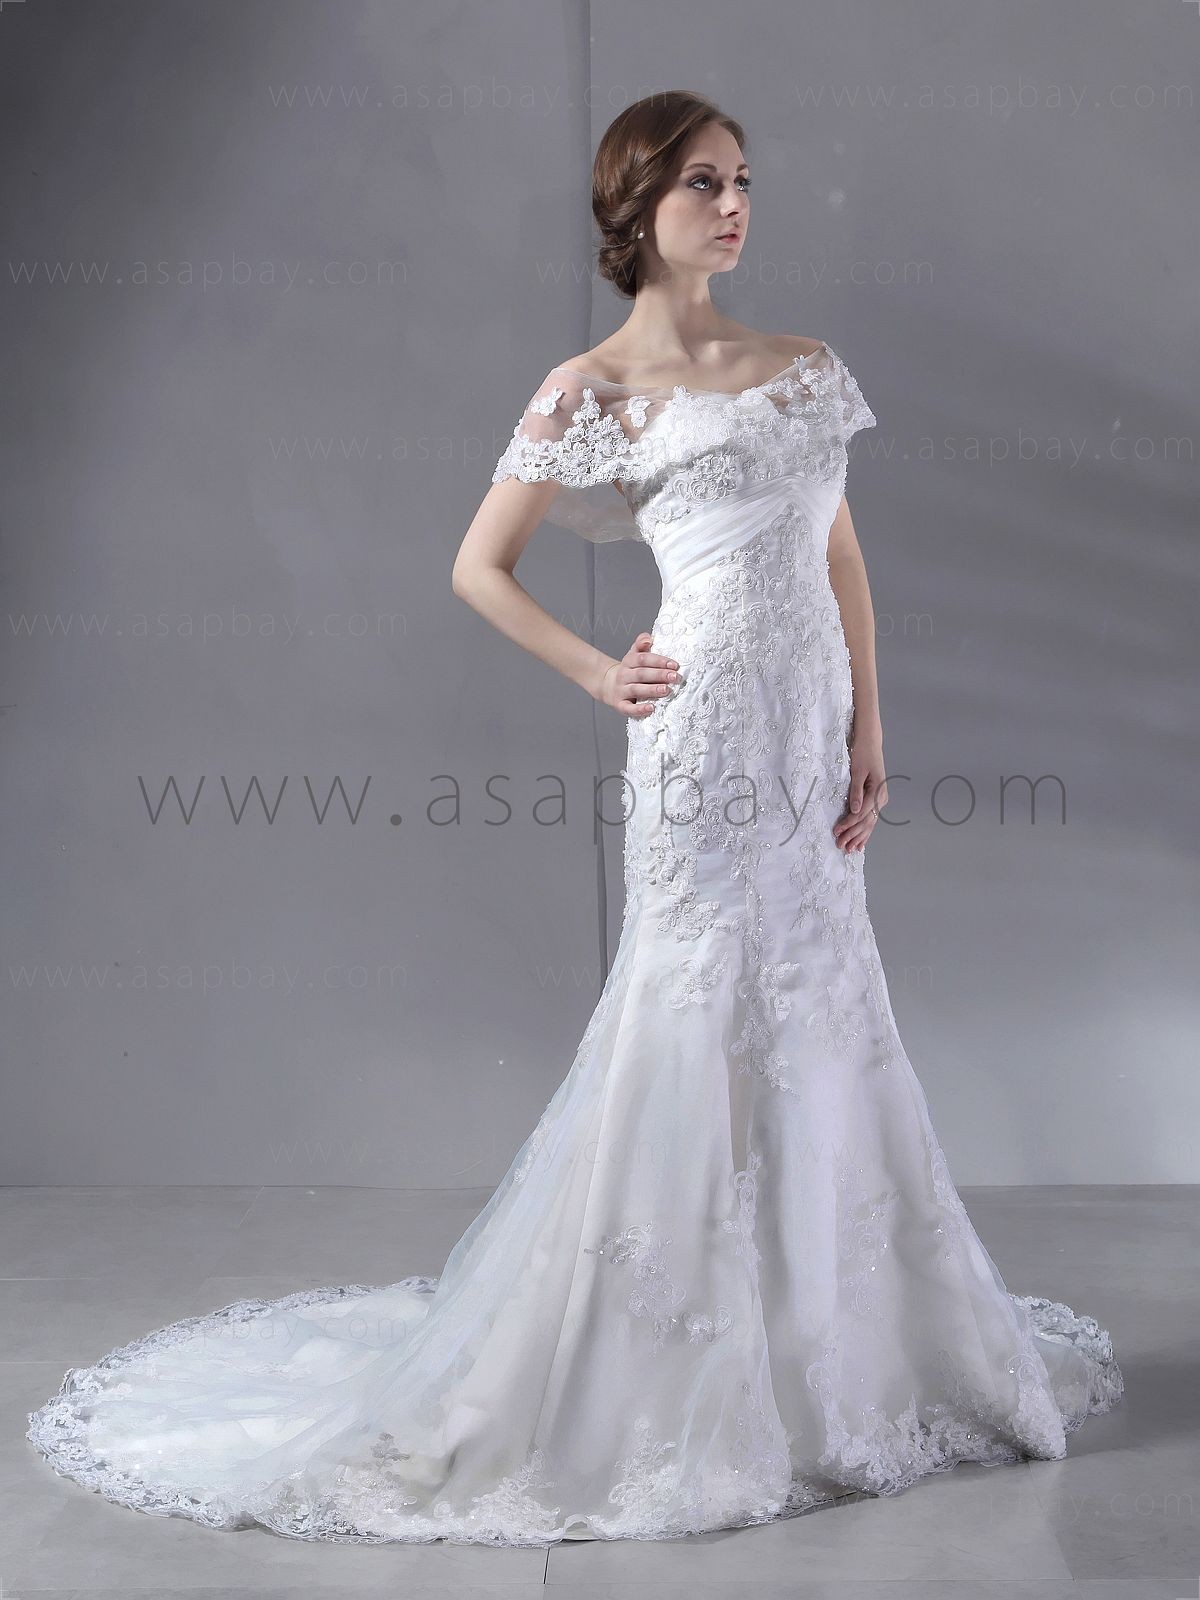 strapless wedding dresses with lace Posted by honey sing at 00:03